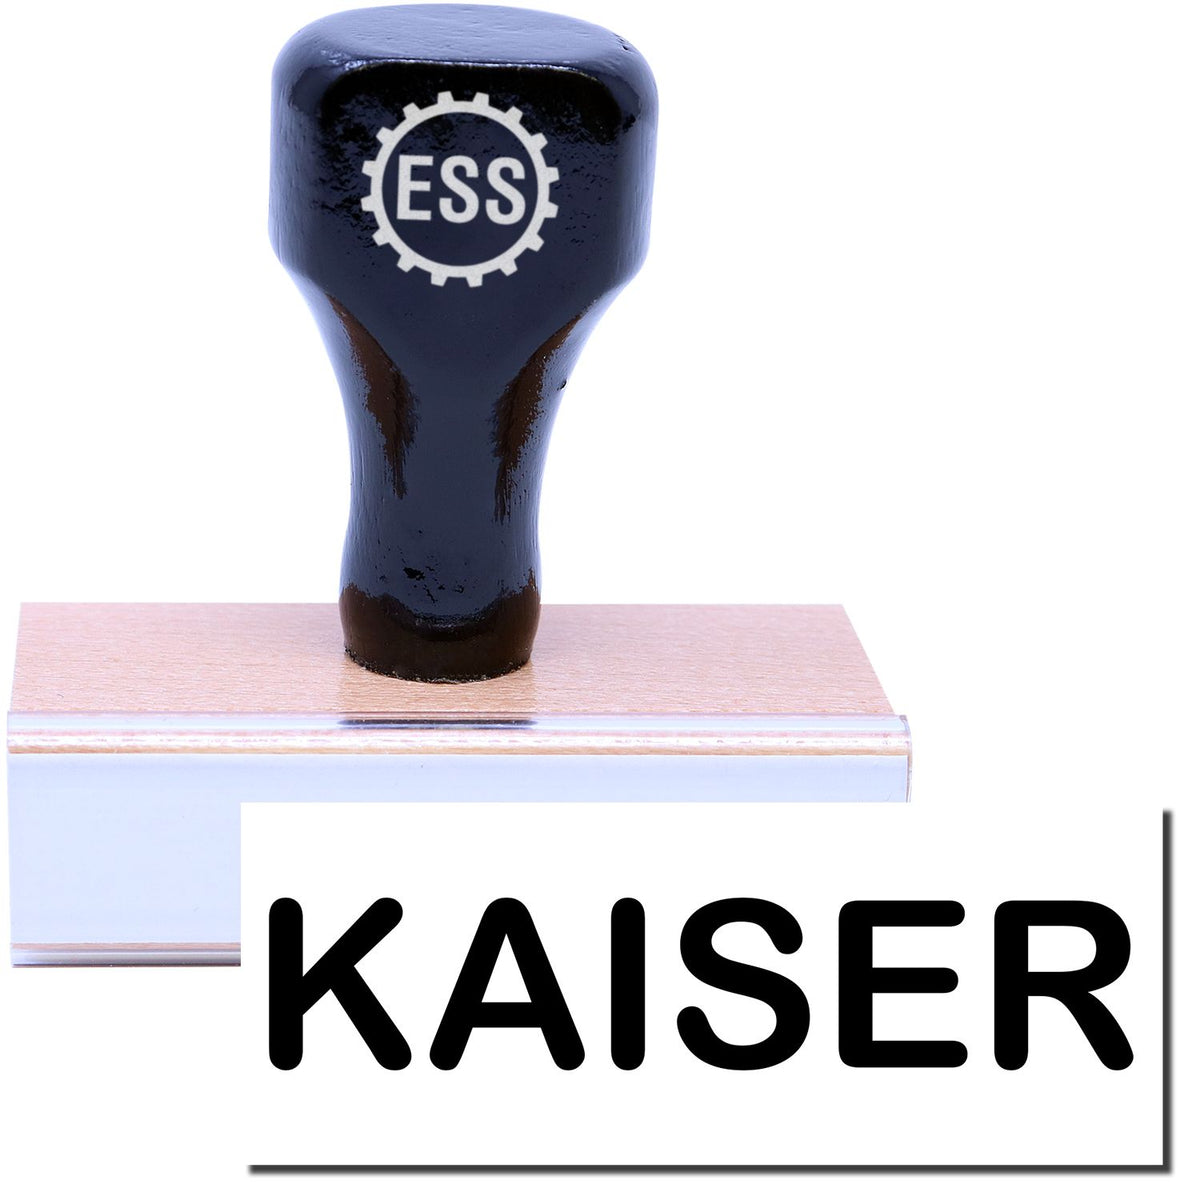 A stock office rubber stamp with a stamped image showing how the text &quot;KAISER&quot; in a large font is displayed after stamping.